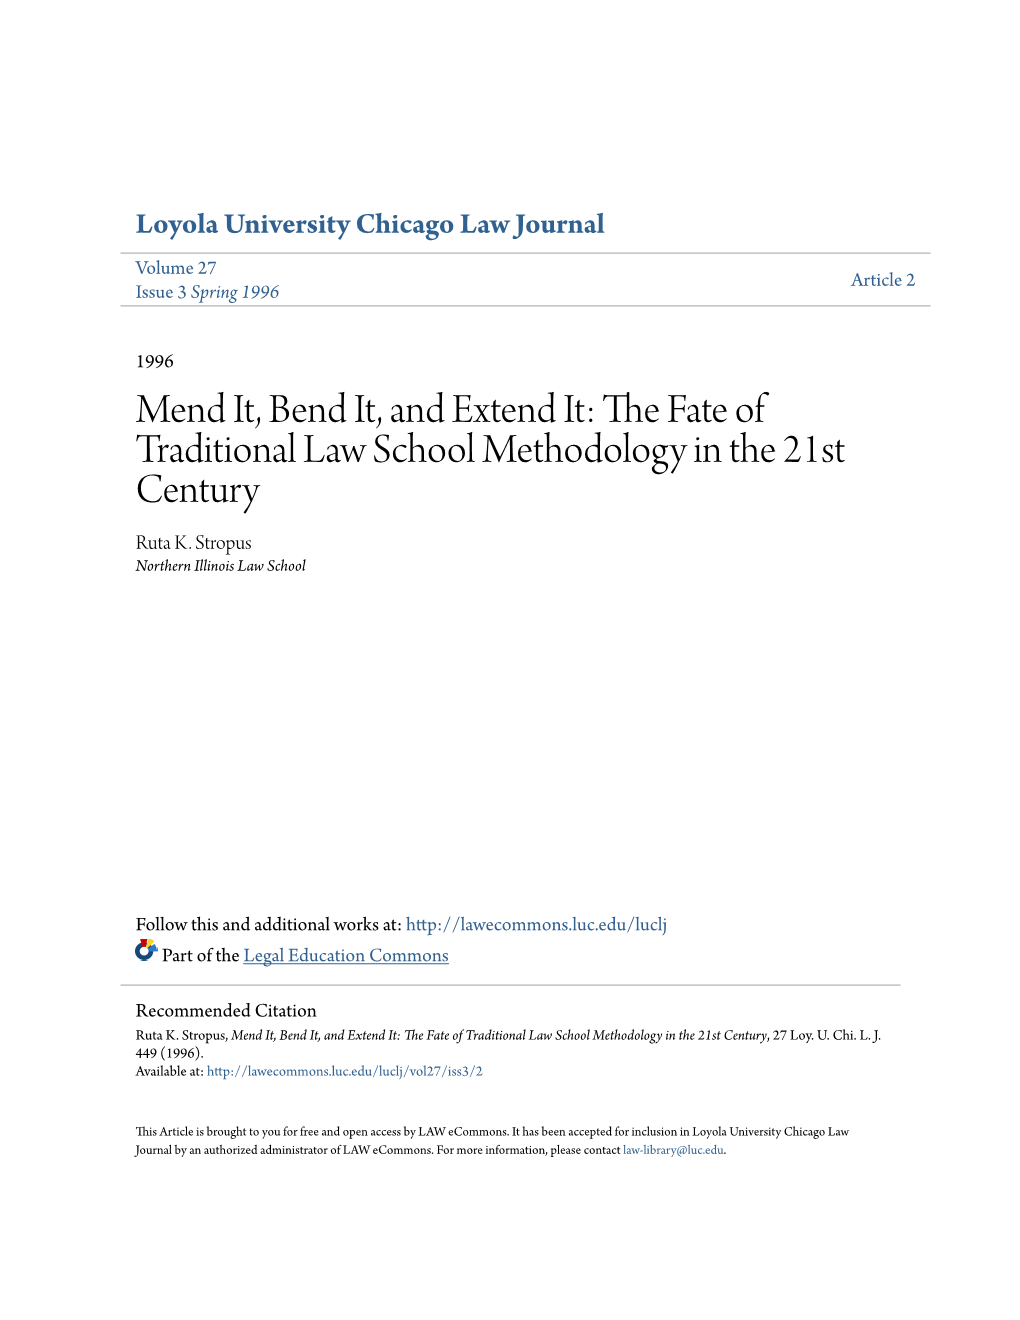 Mend It, Bend It, and Extend It: the Fate of Traditional Law School Methodology in the 21St Century, 27 Loy